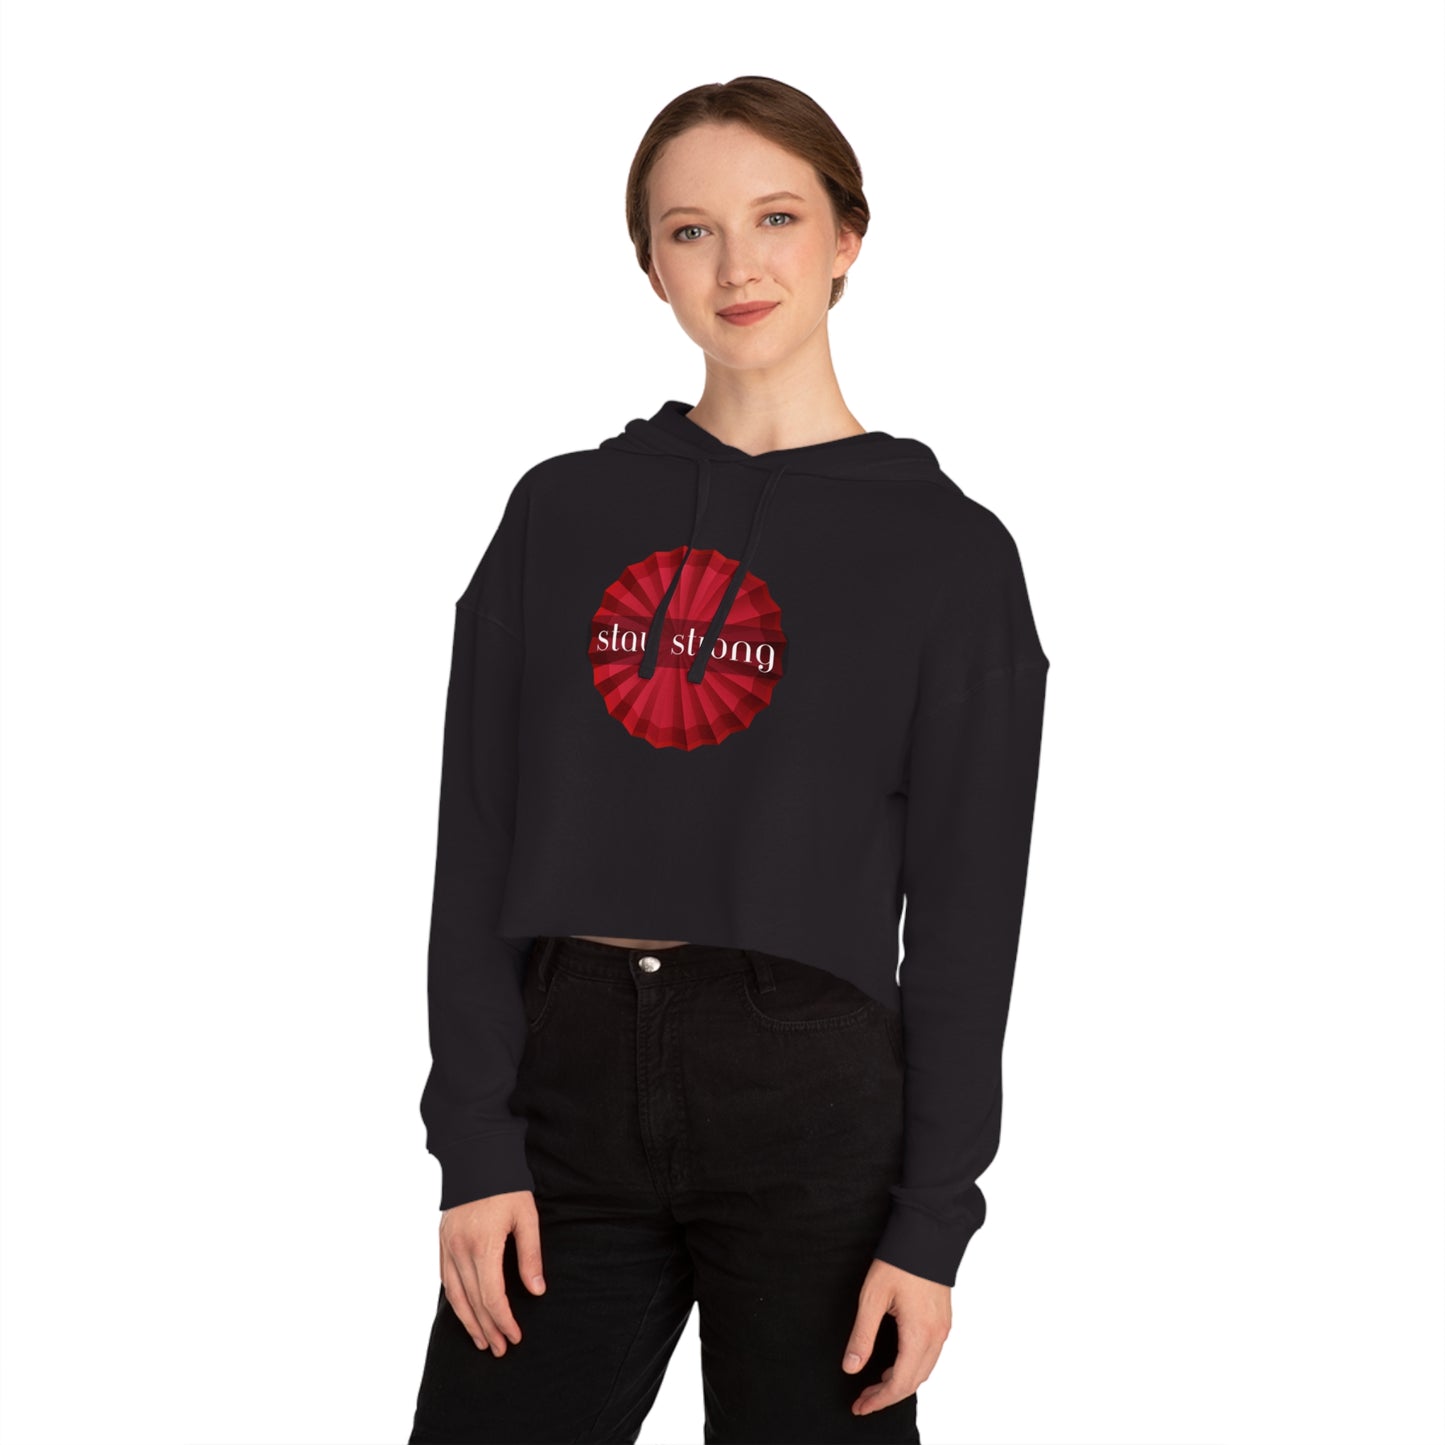 Colorful “stay strong” with within an origami flower design on this stylish Women’s Cropped Hooded Sweatshirt for your enjoyment.